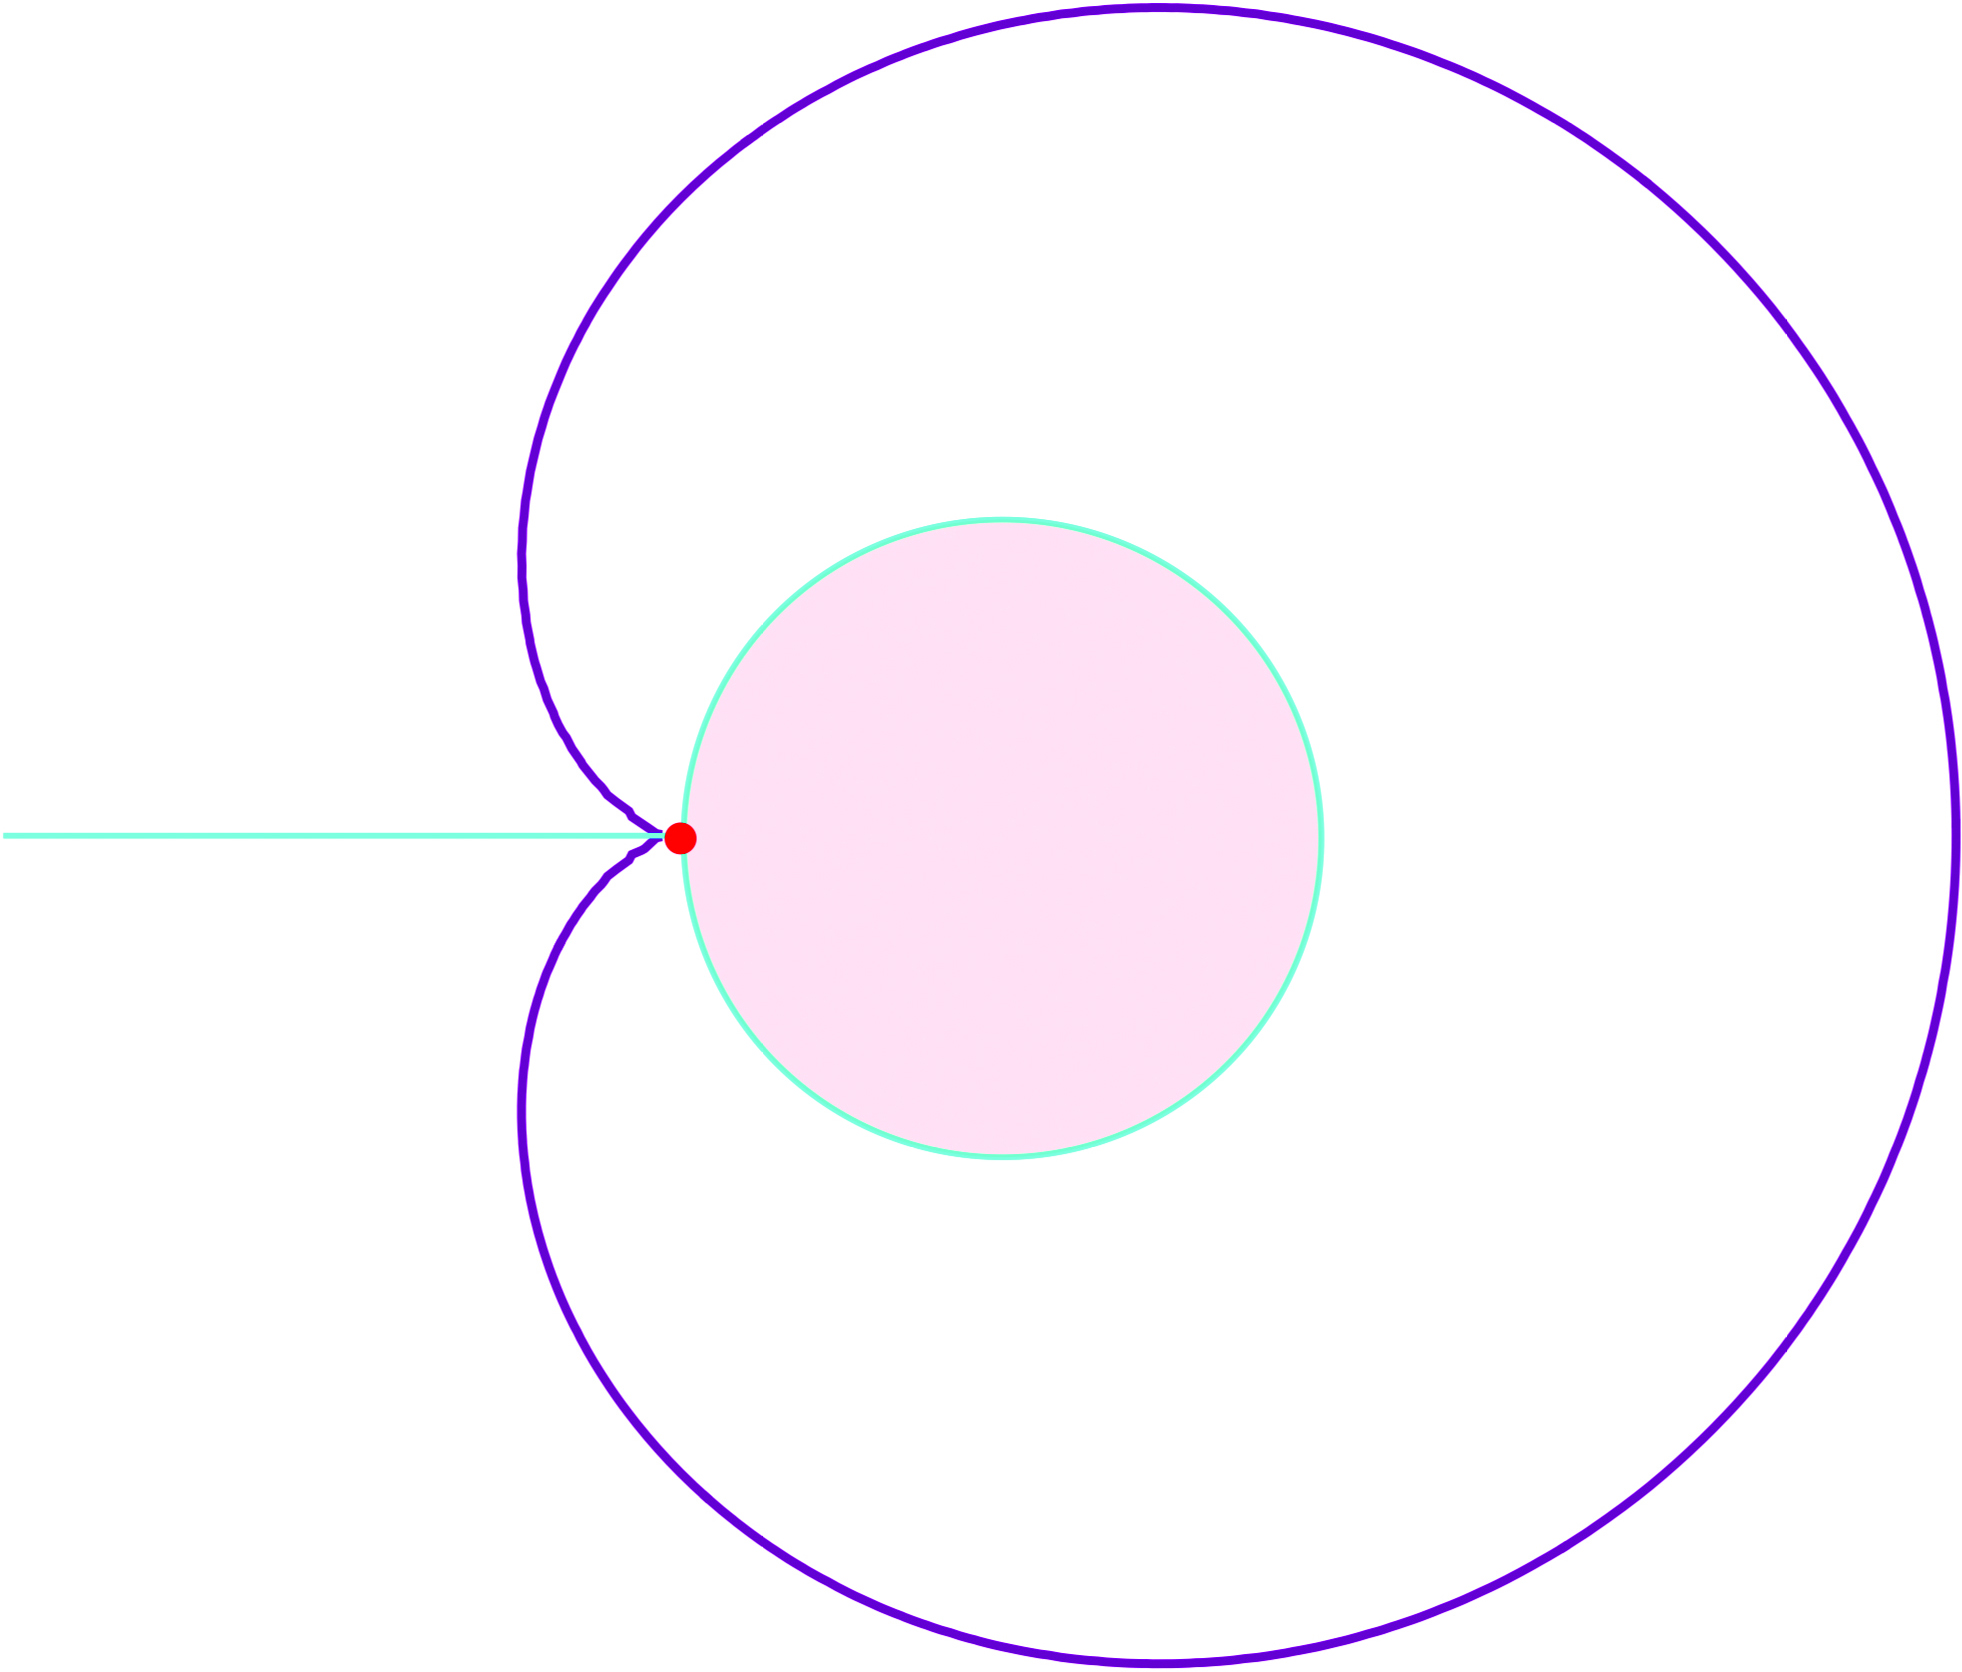 &lt;strong&gt;Figure 3.&lt;/strong&gt; For any point within the pink region, the unique closest point on the purple curve is the red cusp. In the teal region, the red cusp is one of several closest points. Figure courtesy of [1].